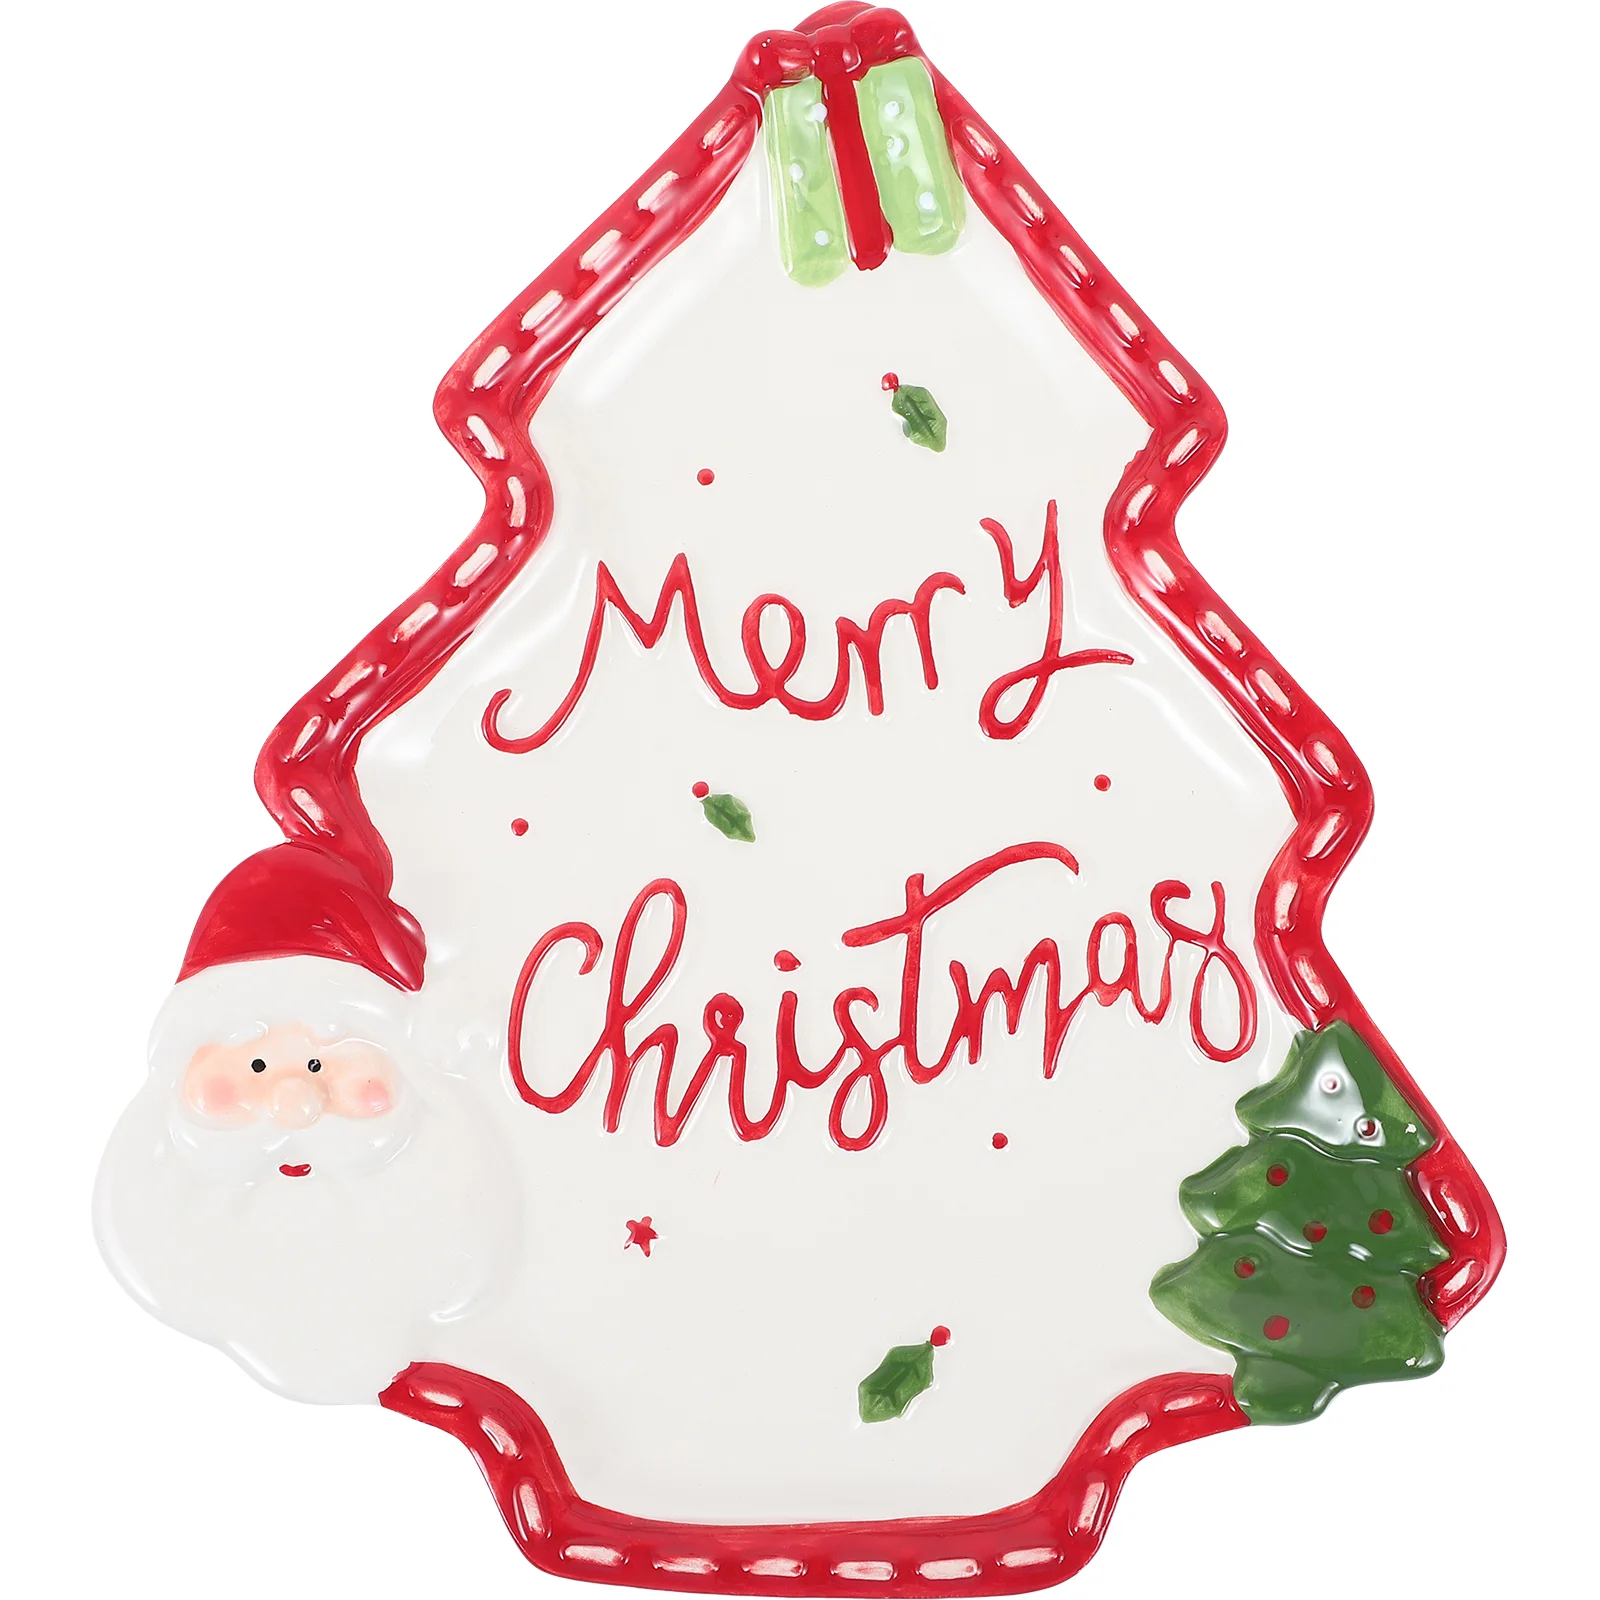 

Christmas Ceramic Plate Decorative Salad Sauce Dishes Dipping Decore Food Serving Chips Plates Dessert Condiments